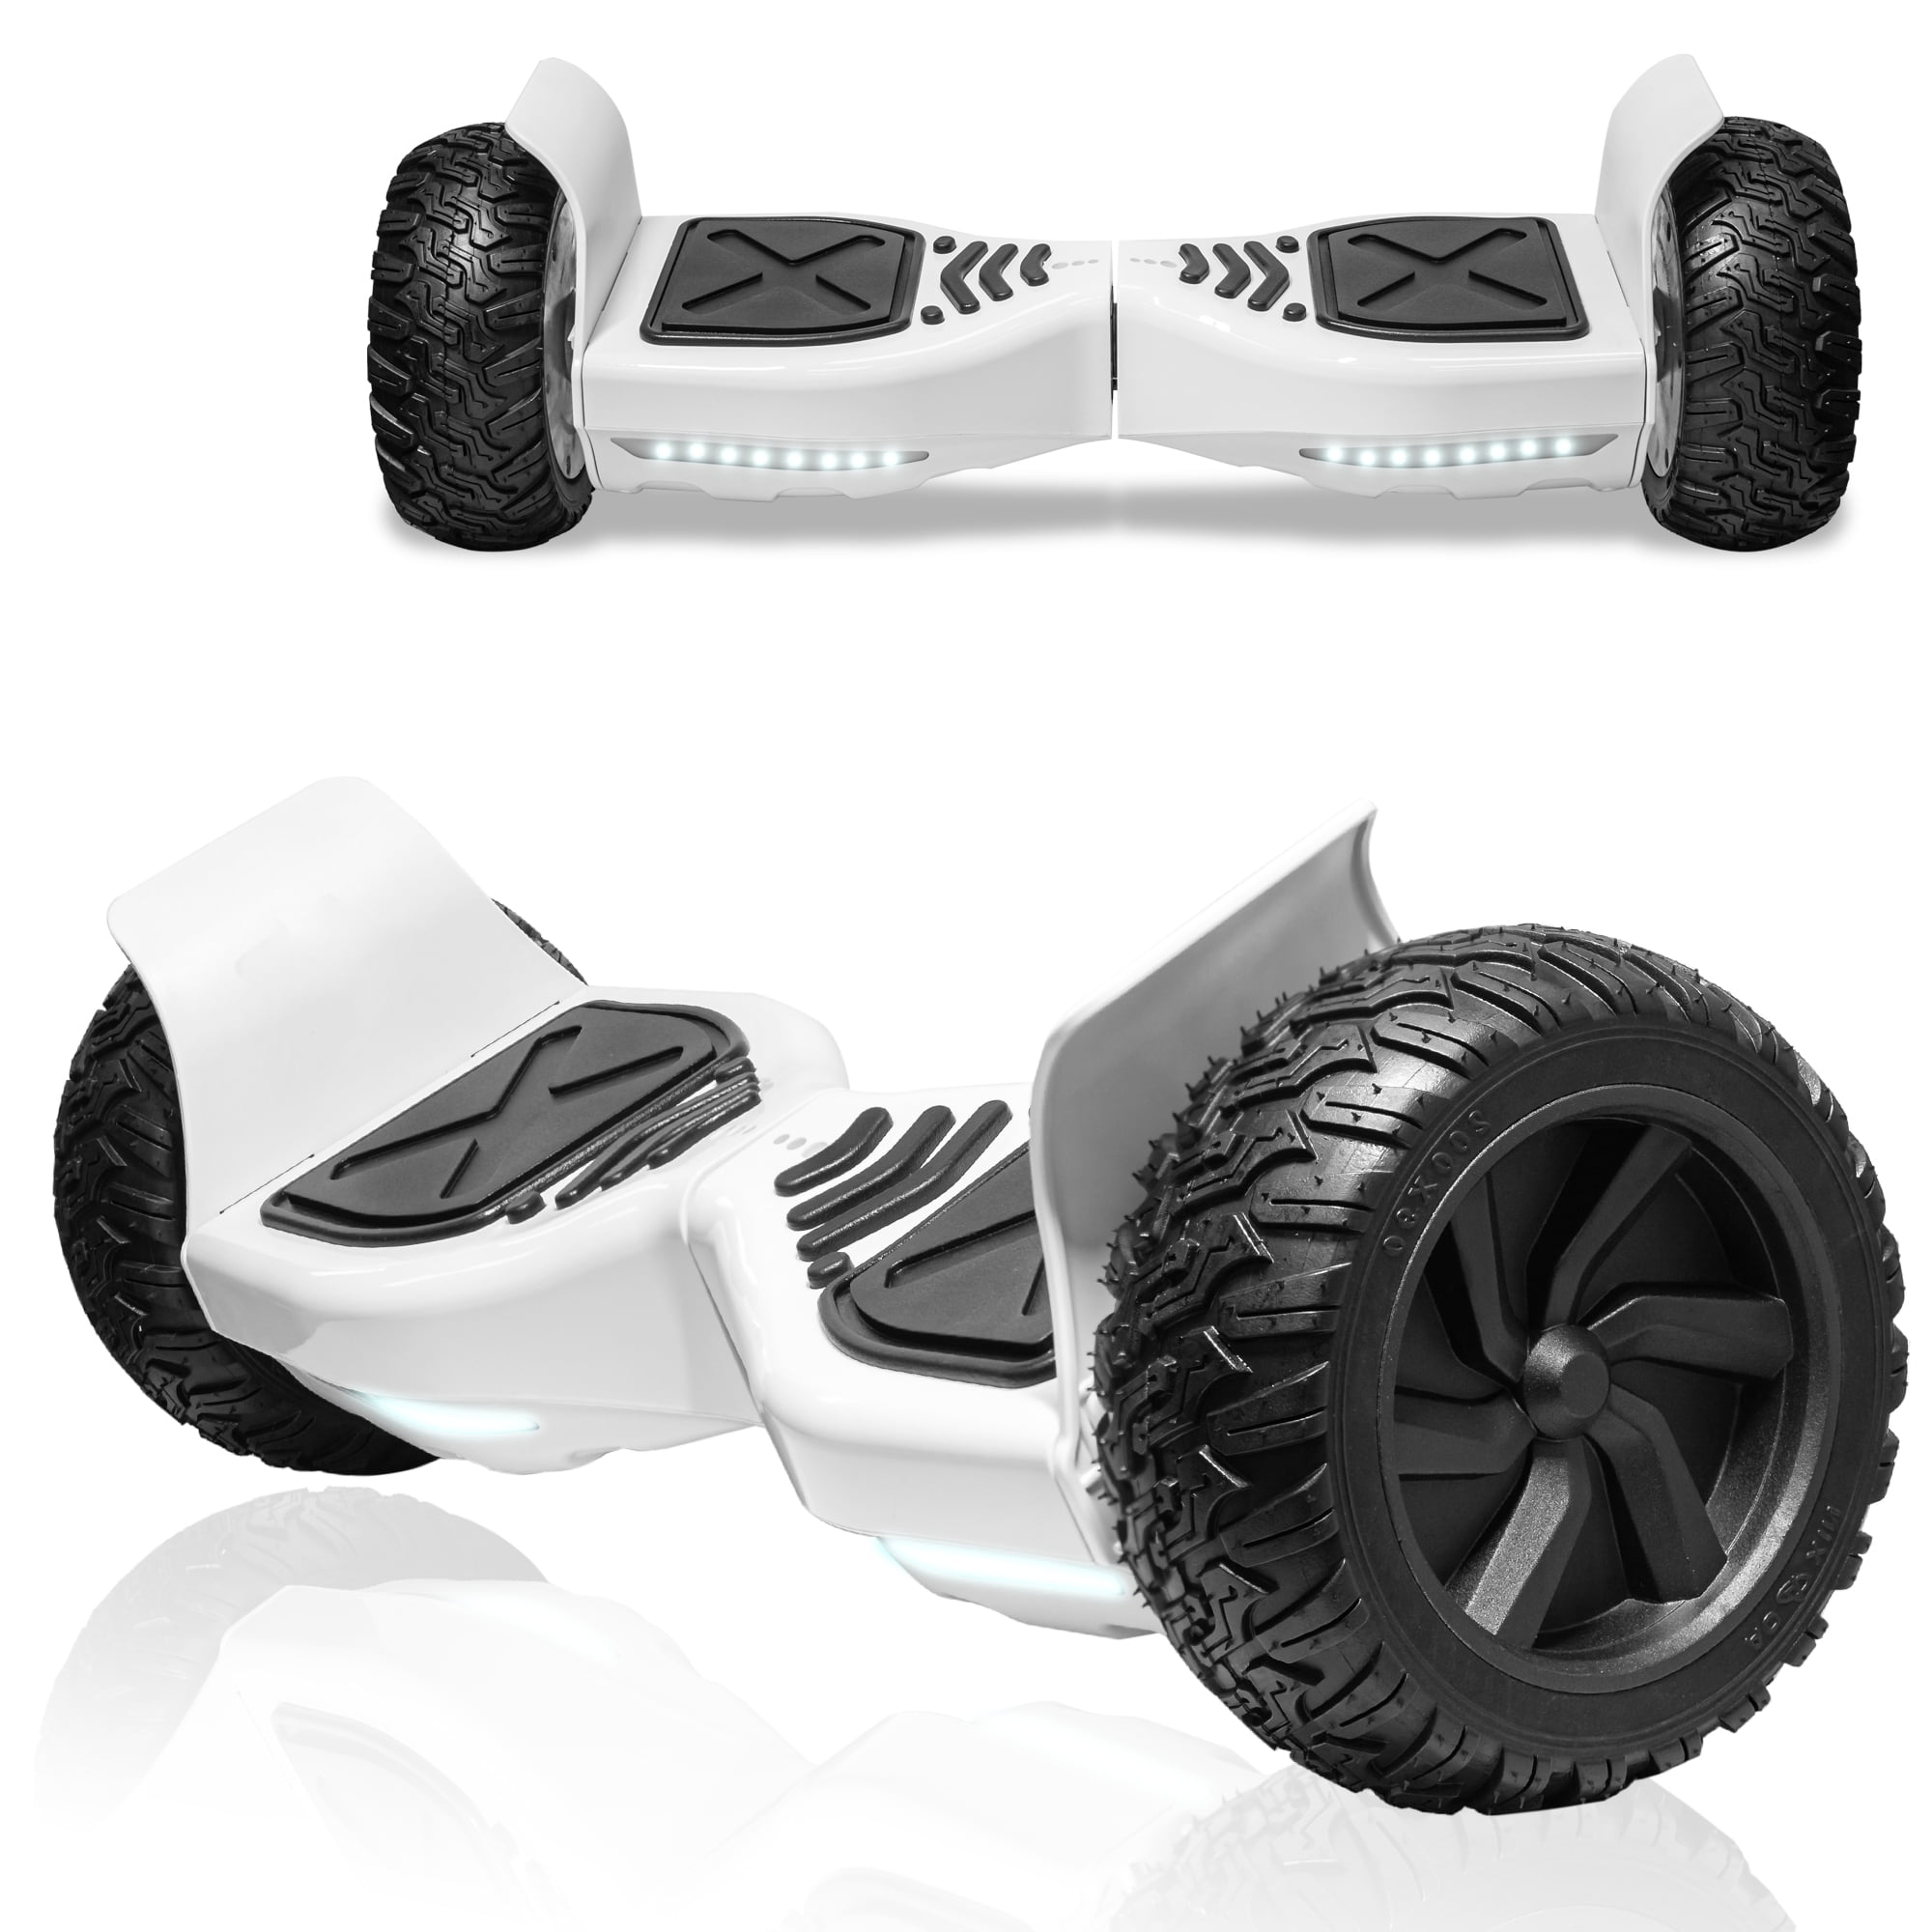 Hoverkart GeekMe Hover Scooter Board with Hoverkart 8.5  Off road self balancing scooter for all terrains with powerful engine Bluetooth integrated APP 